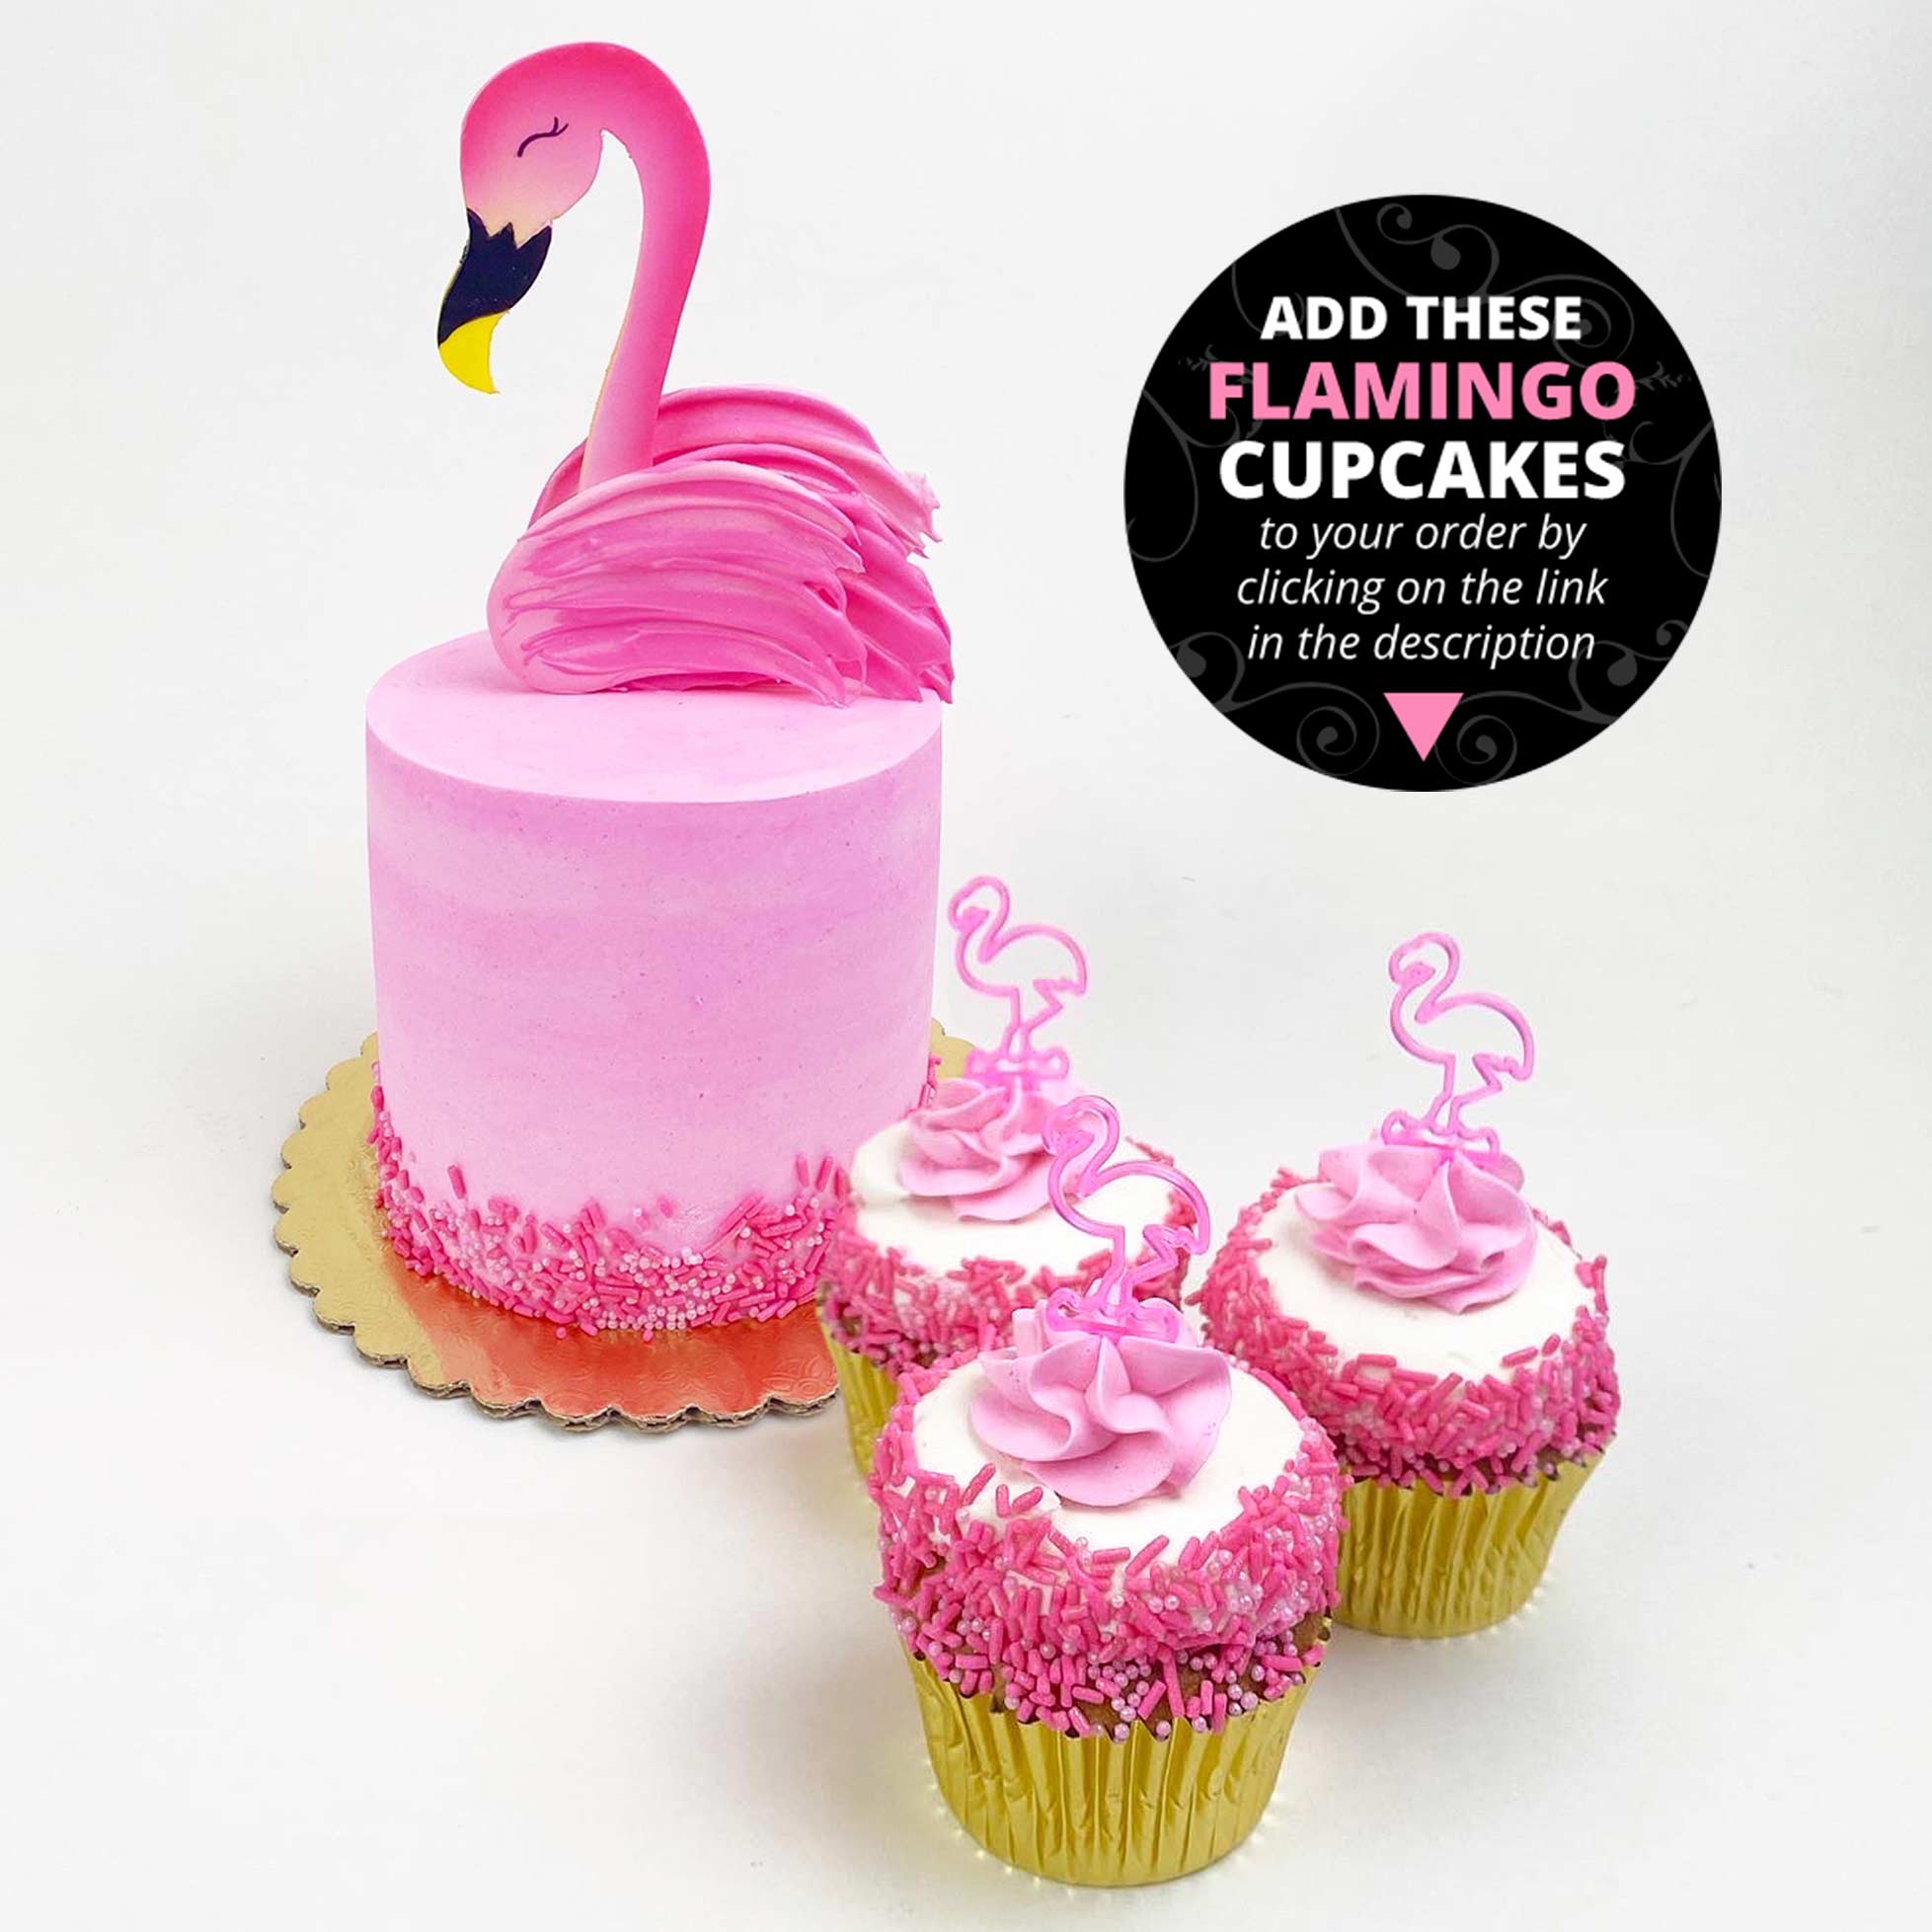 Petite Flamingo Cake. Add these Flamingo Cupcakes to your order by clicking on the link in the description